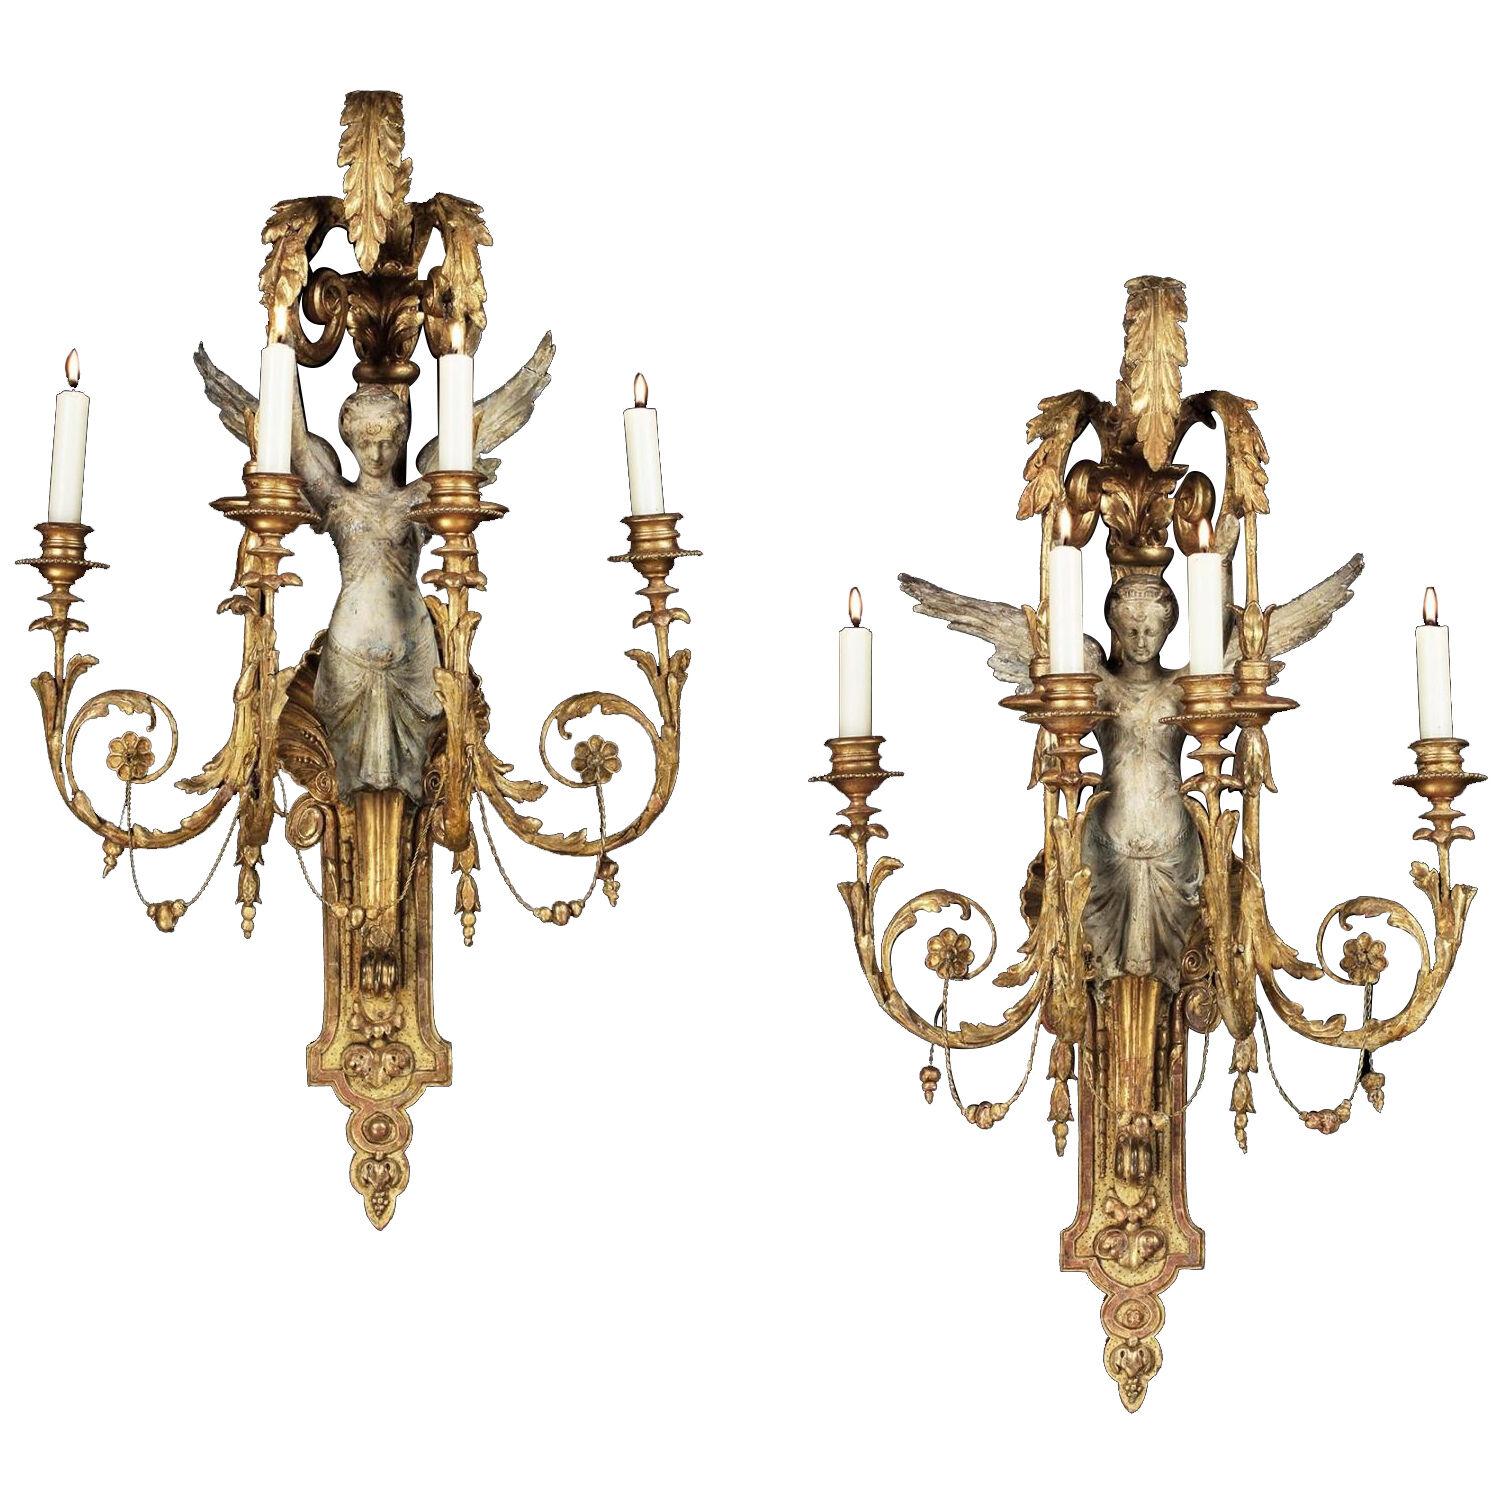 An Important Pair of Late 18th Century Italian Wall Sconces, Lombardy Region